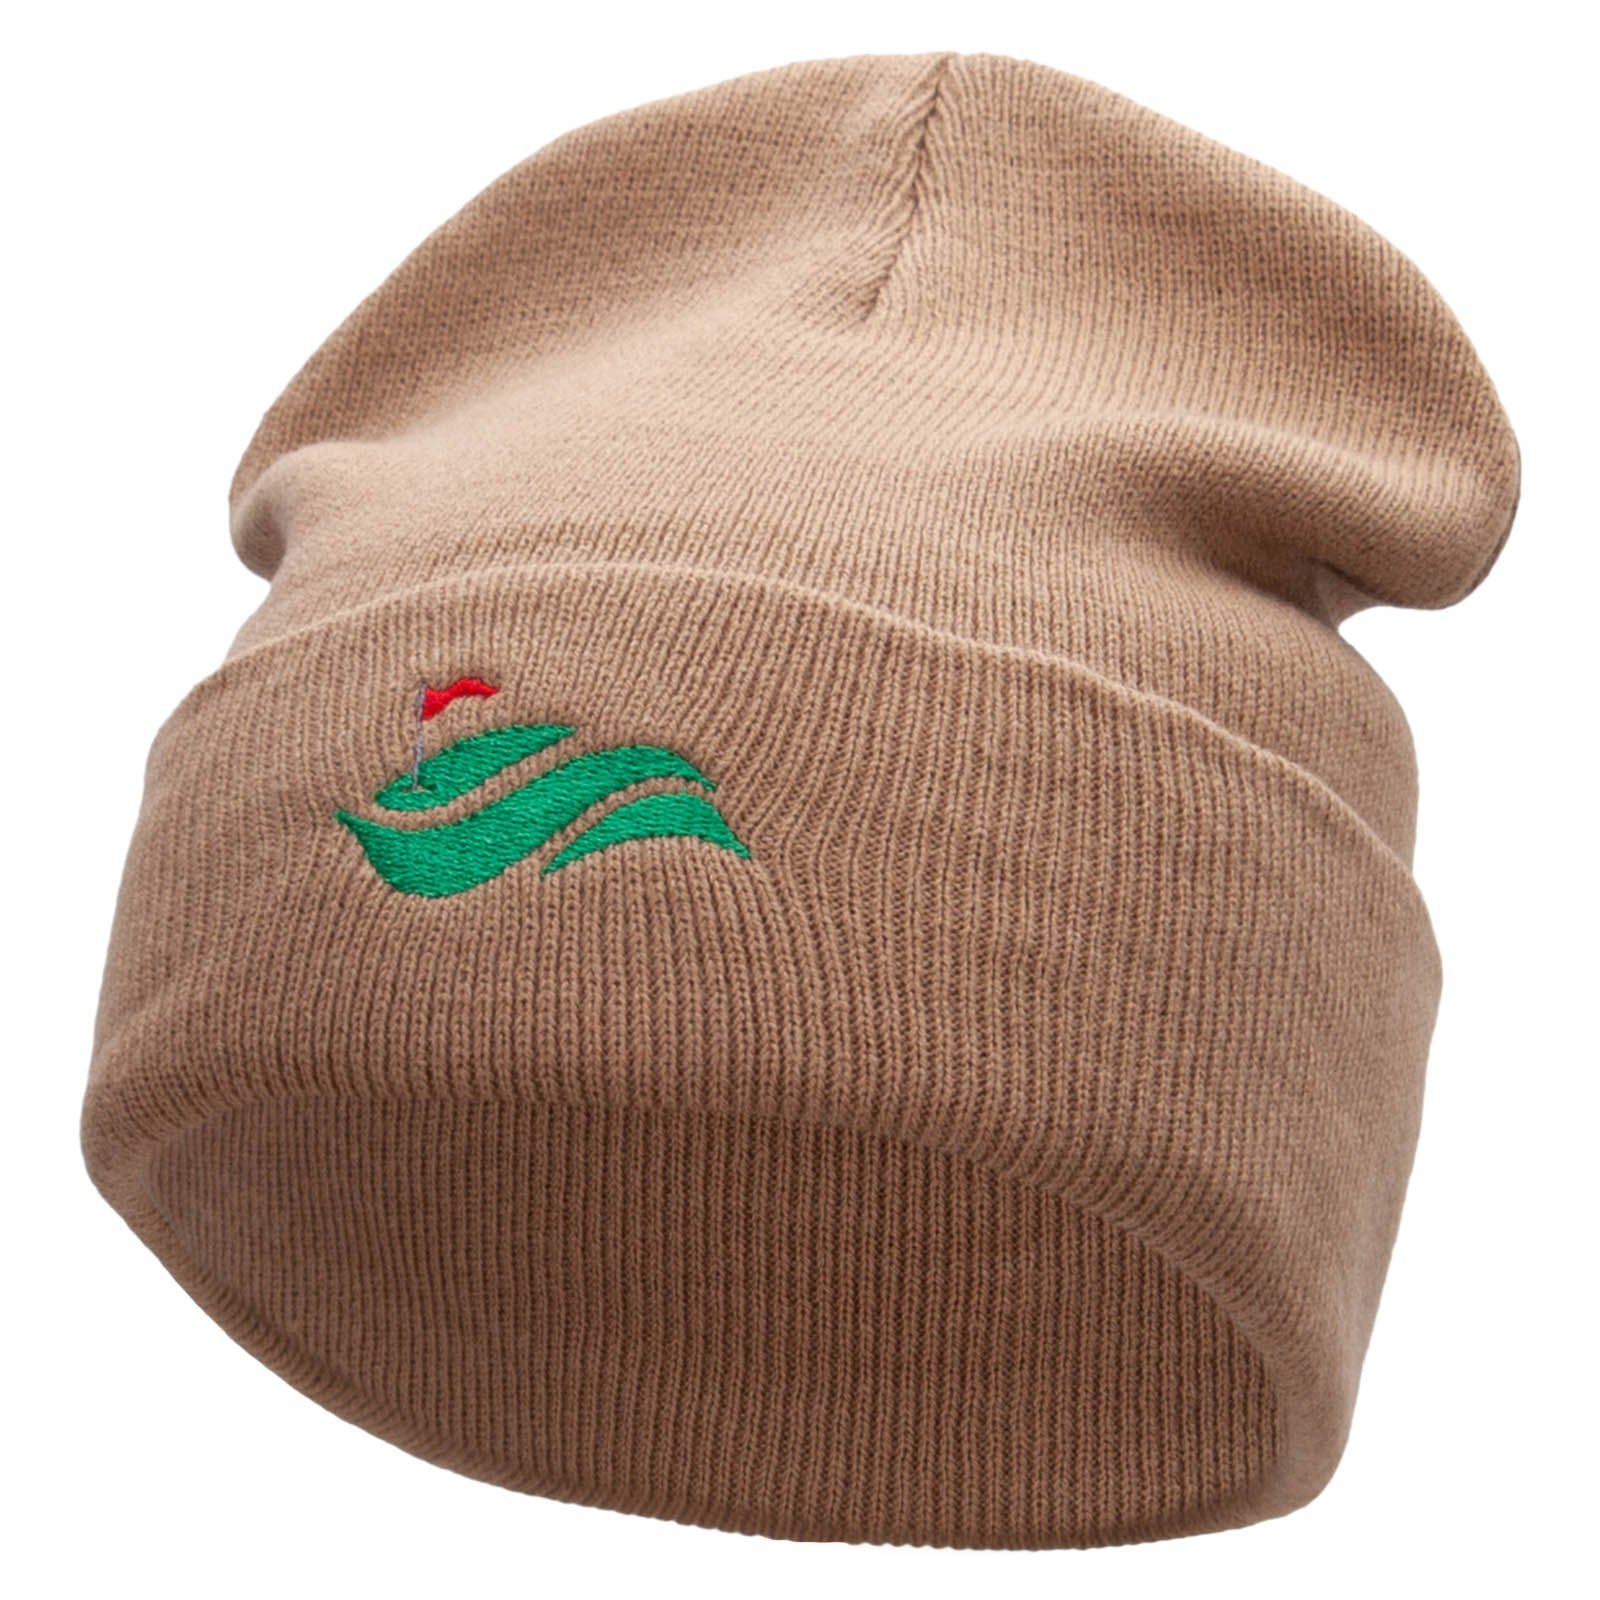 Golf Cup and Greens Embroidered 12 inch Acrylic Cuffed Long Beanie - Khaki OSFM